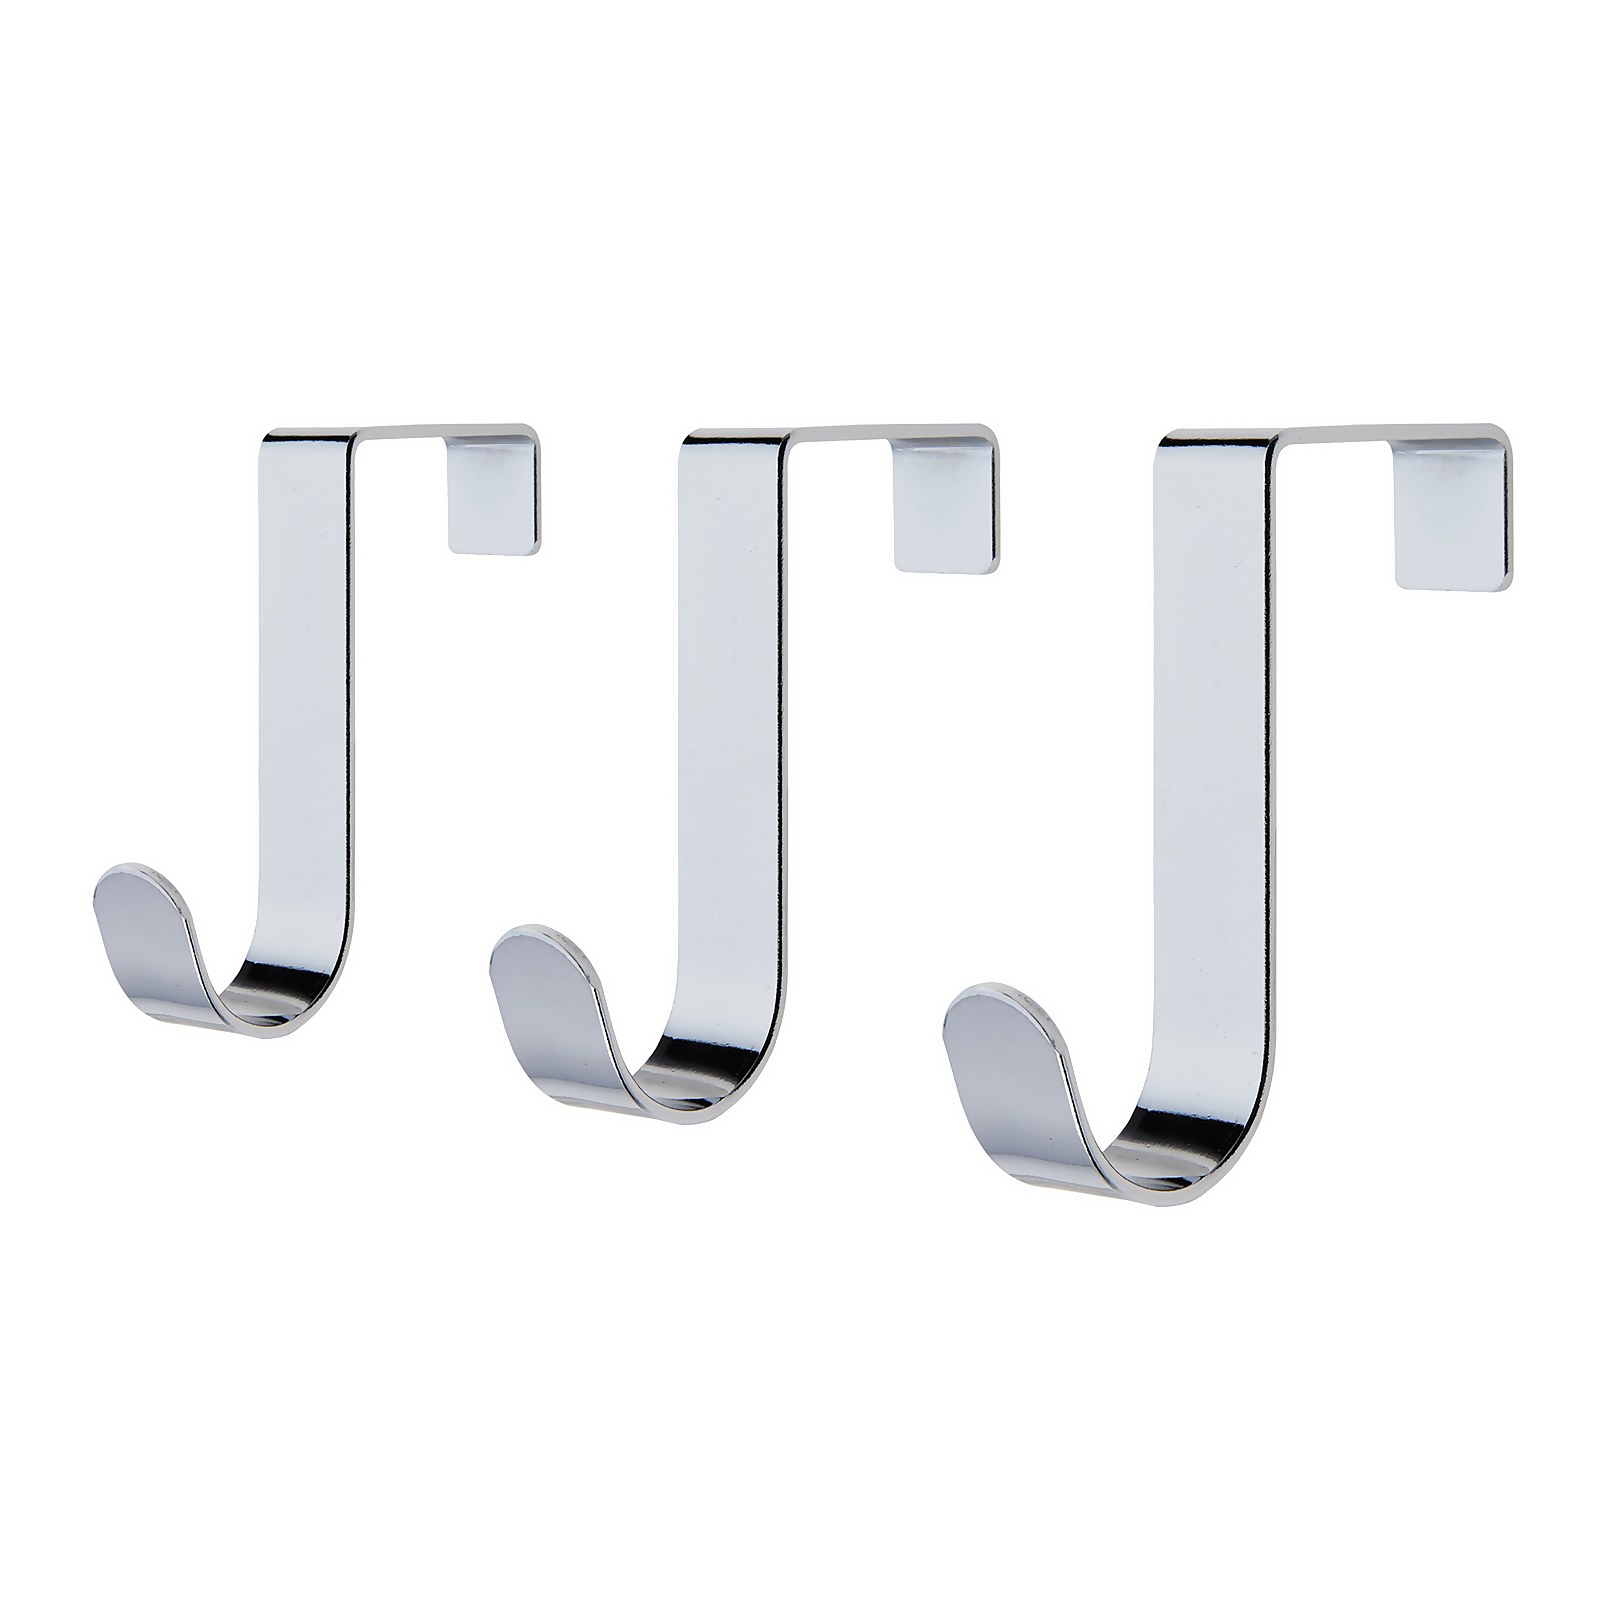 Photo of Budget Over The Door Hooks - Polished Chrome - 3 Pack